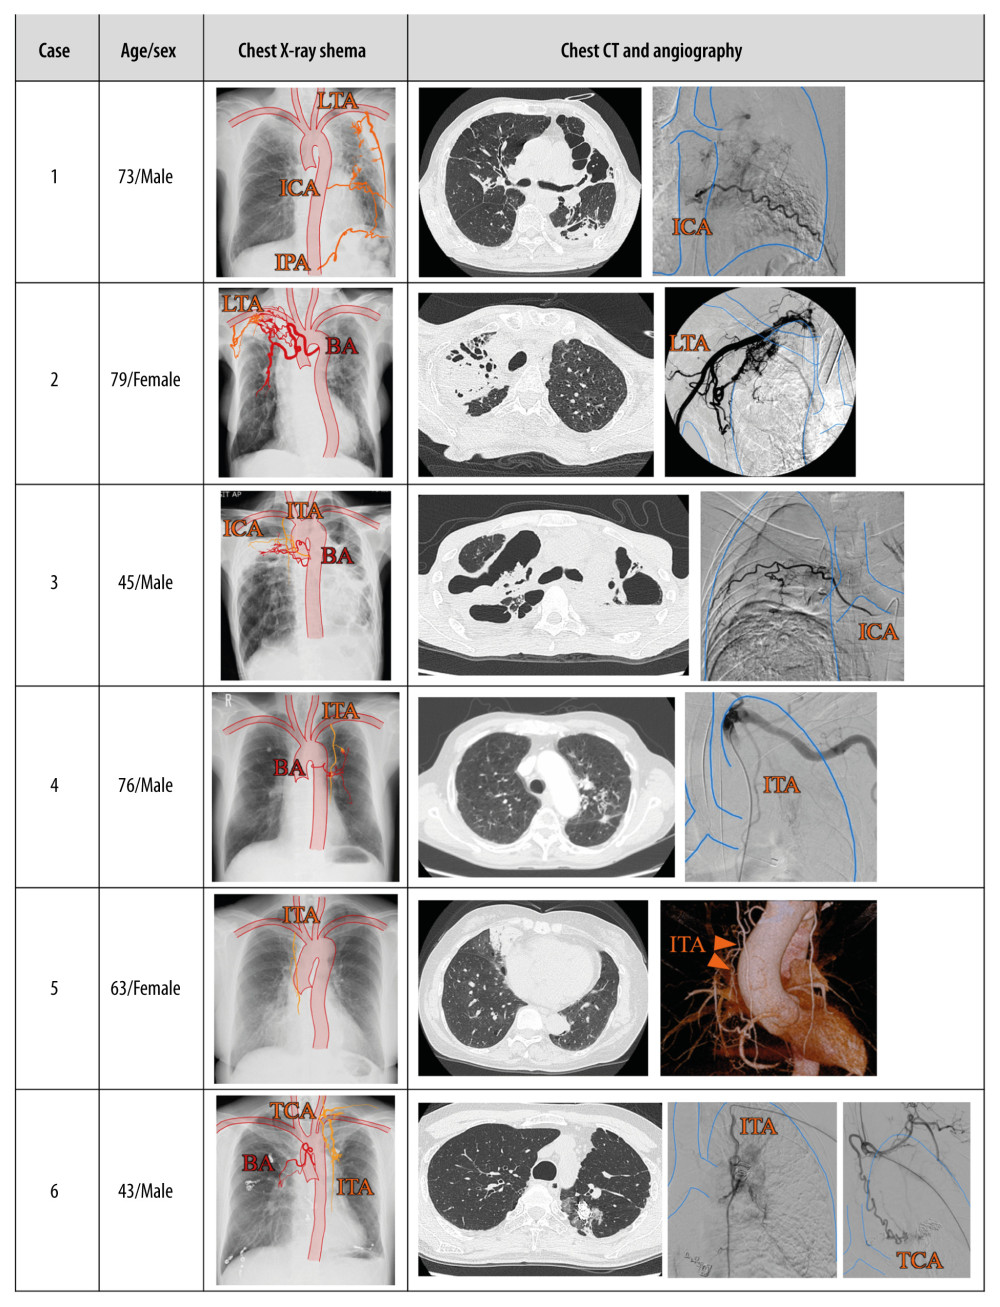 Basic information and imaging findings of the 6 cases. All figures were made with GoodNotes 5®, developed by Time Base Technology Limited (London, United Kingdom). BA – bronchial artery; ICA – intercostal artery; IPA – inferior phrenic artery; ITA – internal thoracic artery; LTA – lateral thoracic artery; TCA – thyroid carotid artery.